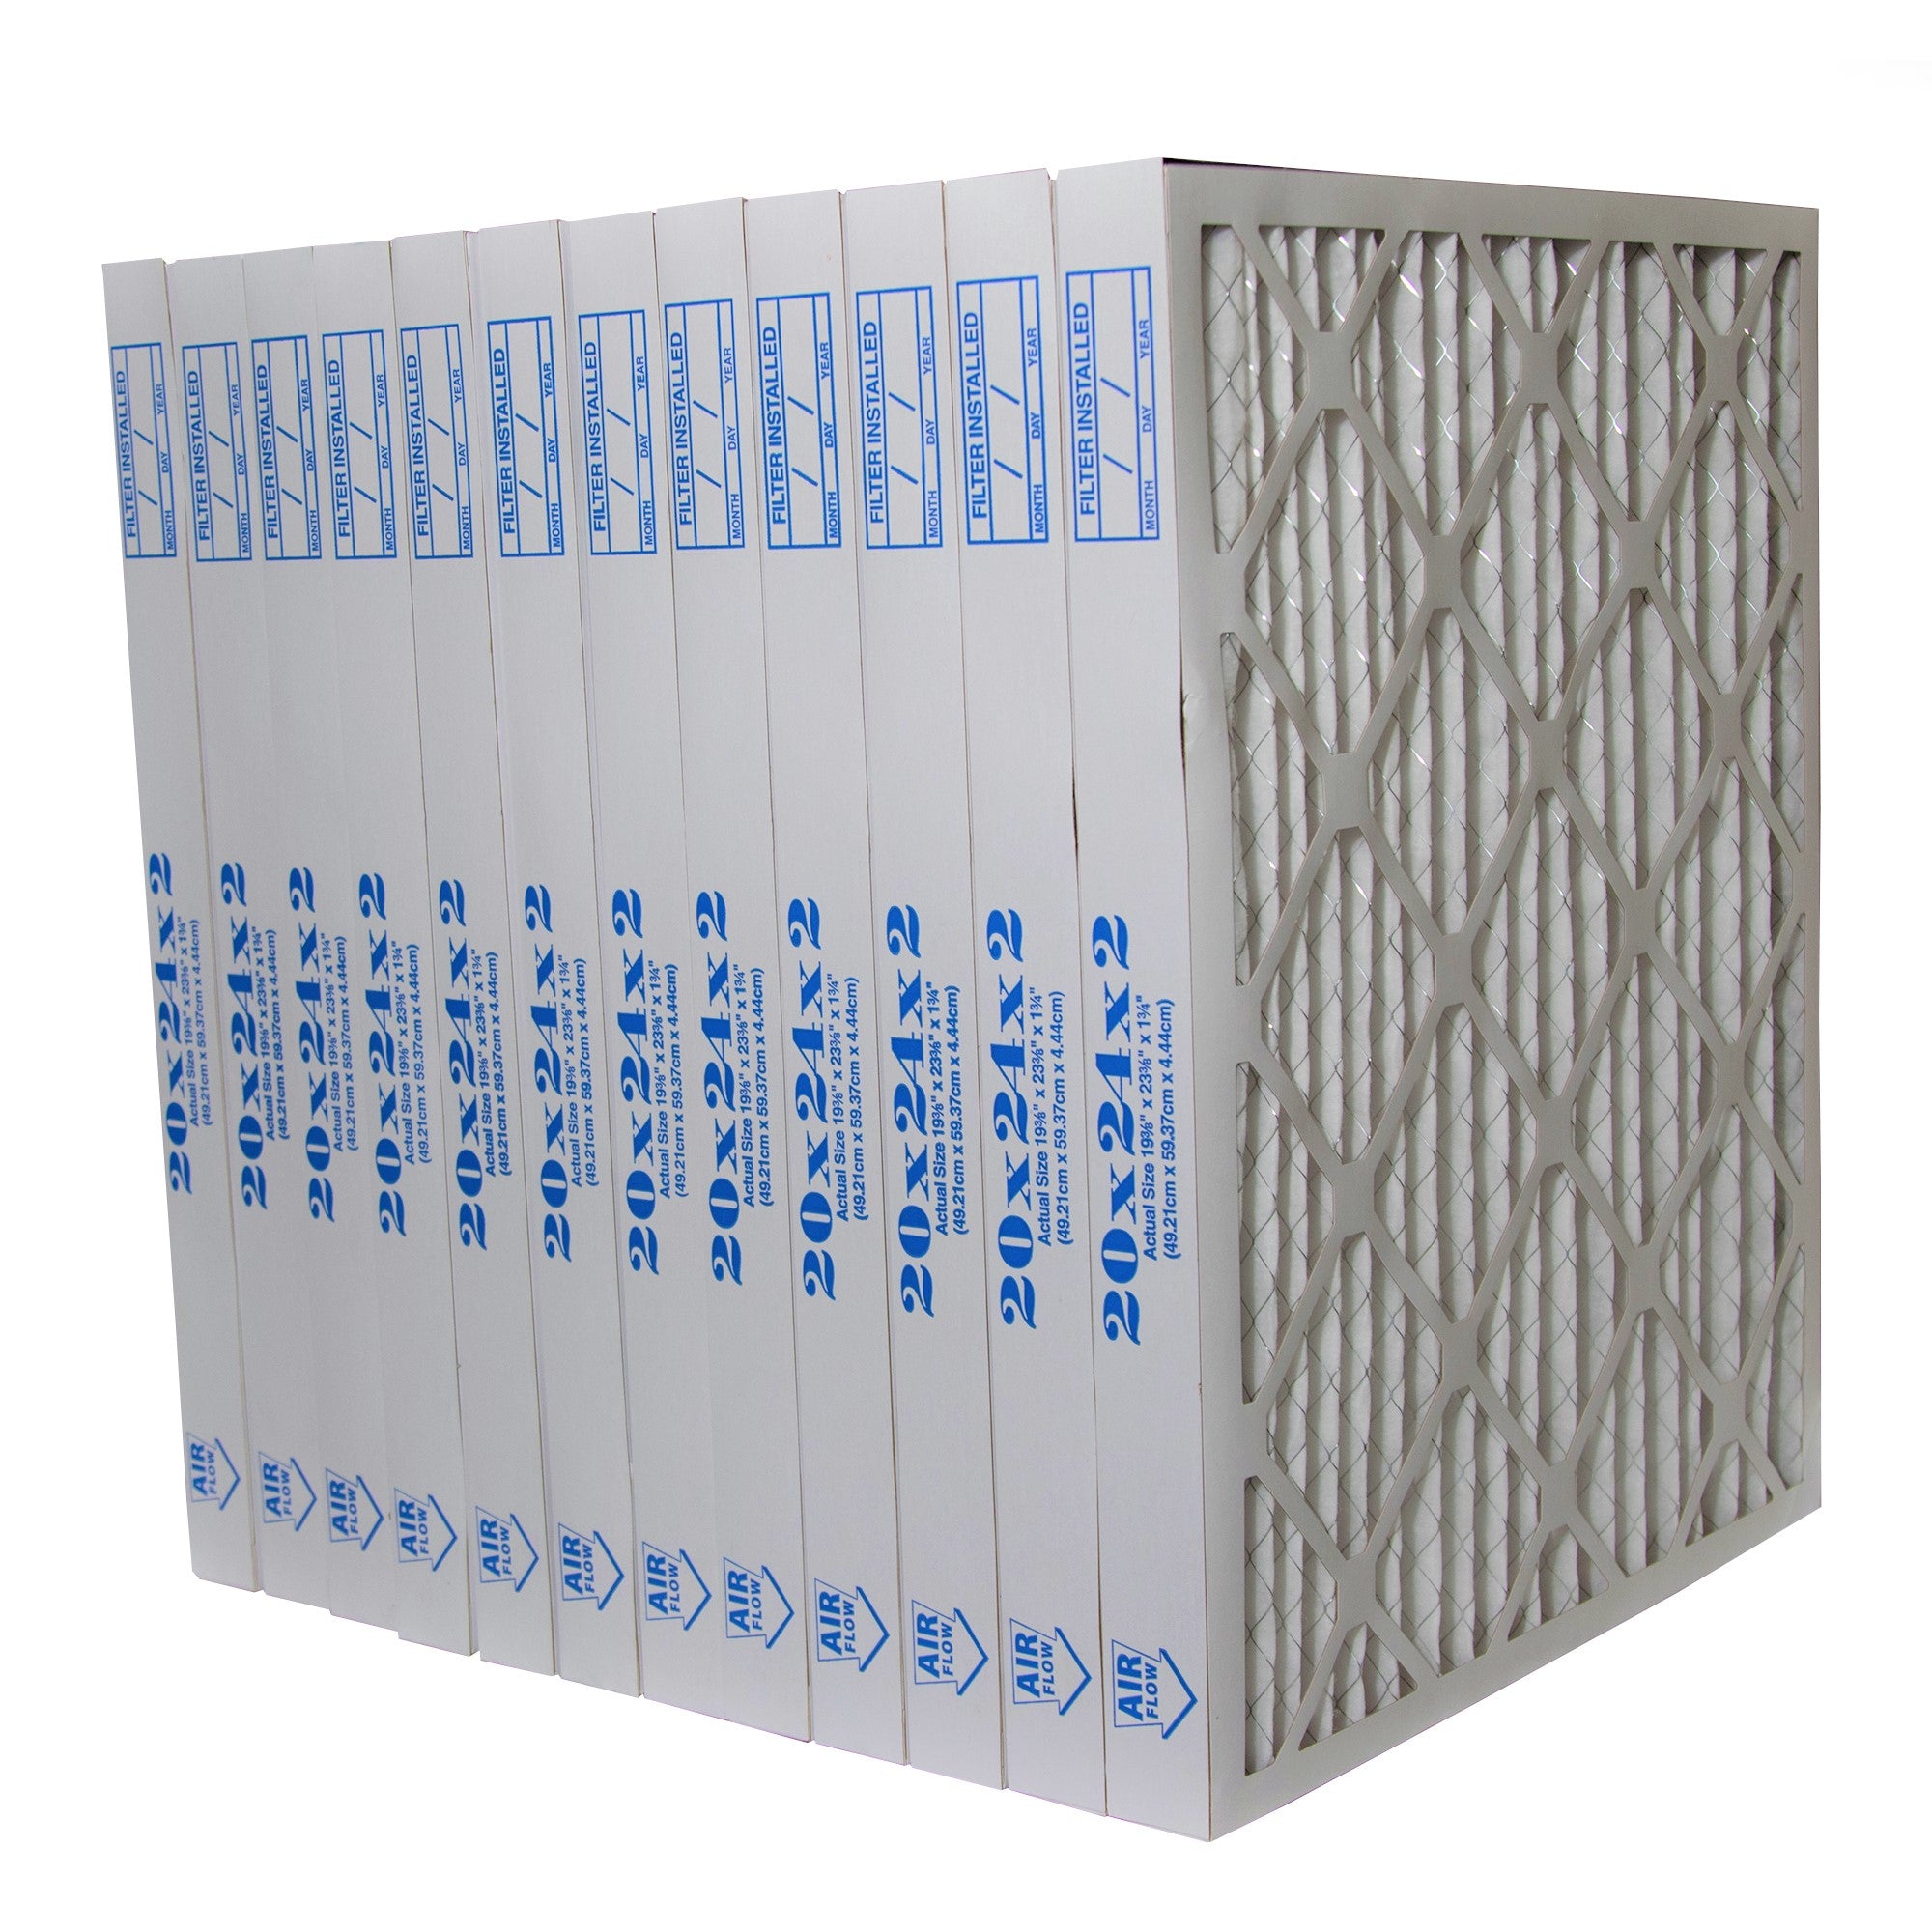 Dafco 20 x 24 x 2 Pleated Filters. MERV 8 Rated. Case of 12